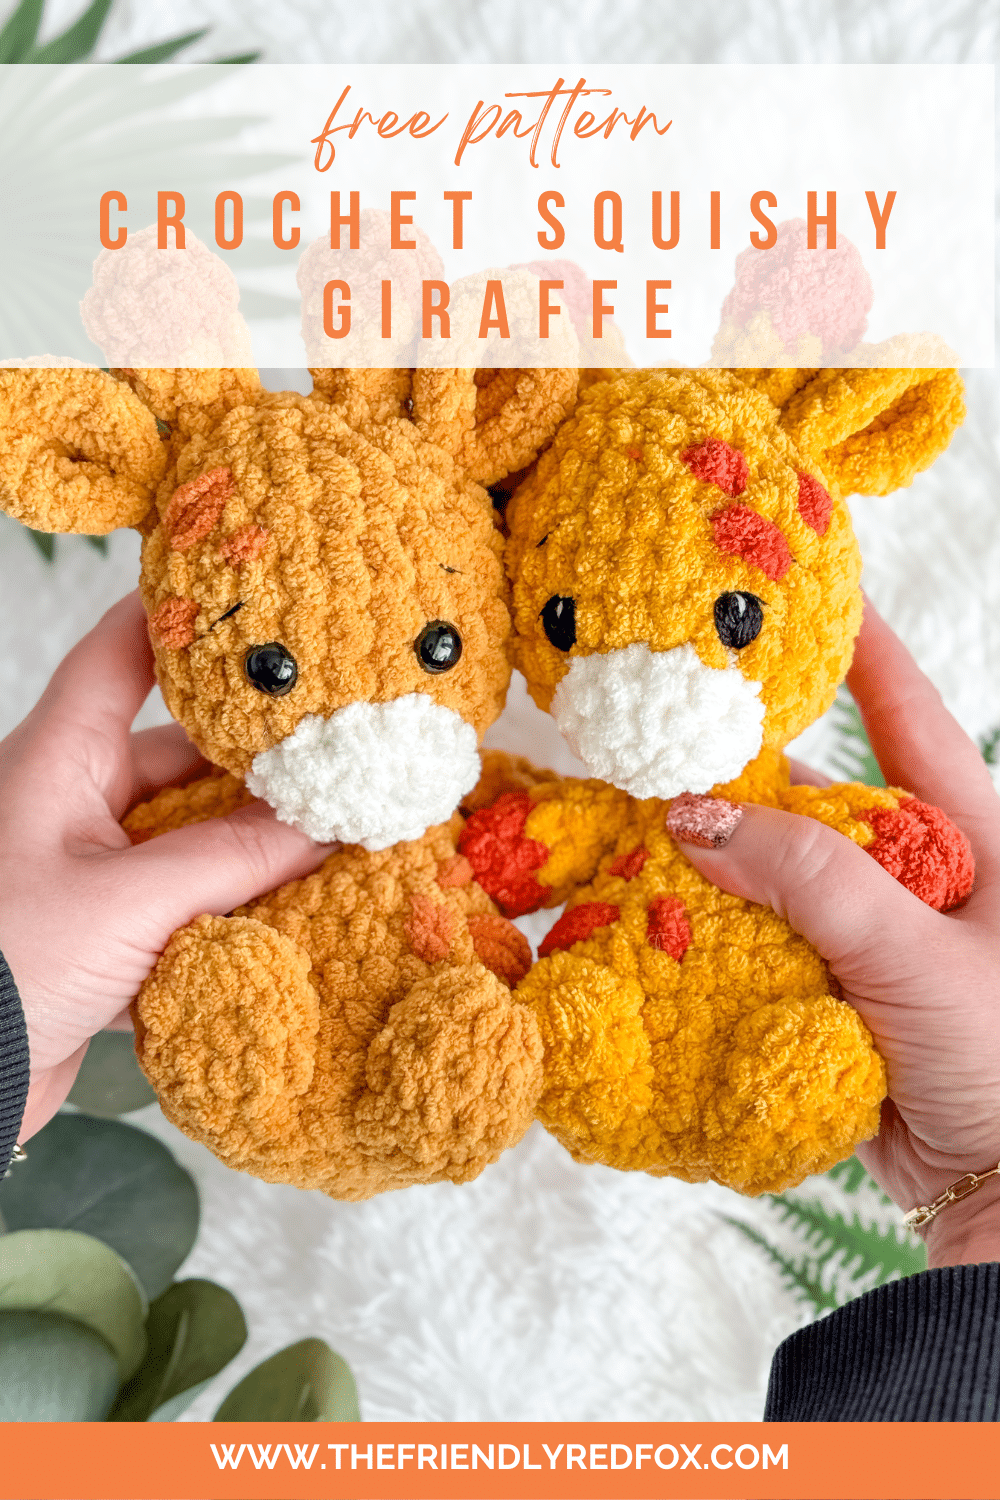 If you want a lovable and squishable friend, this Giraffe crochet pattern is just what you need. Make your own plush giraffe amigurumi with this free pattern!